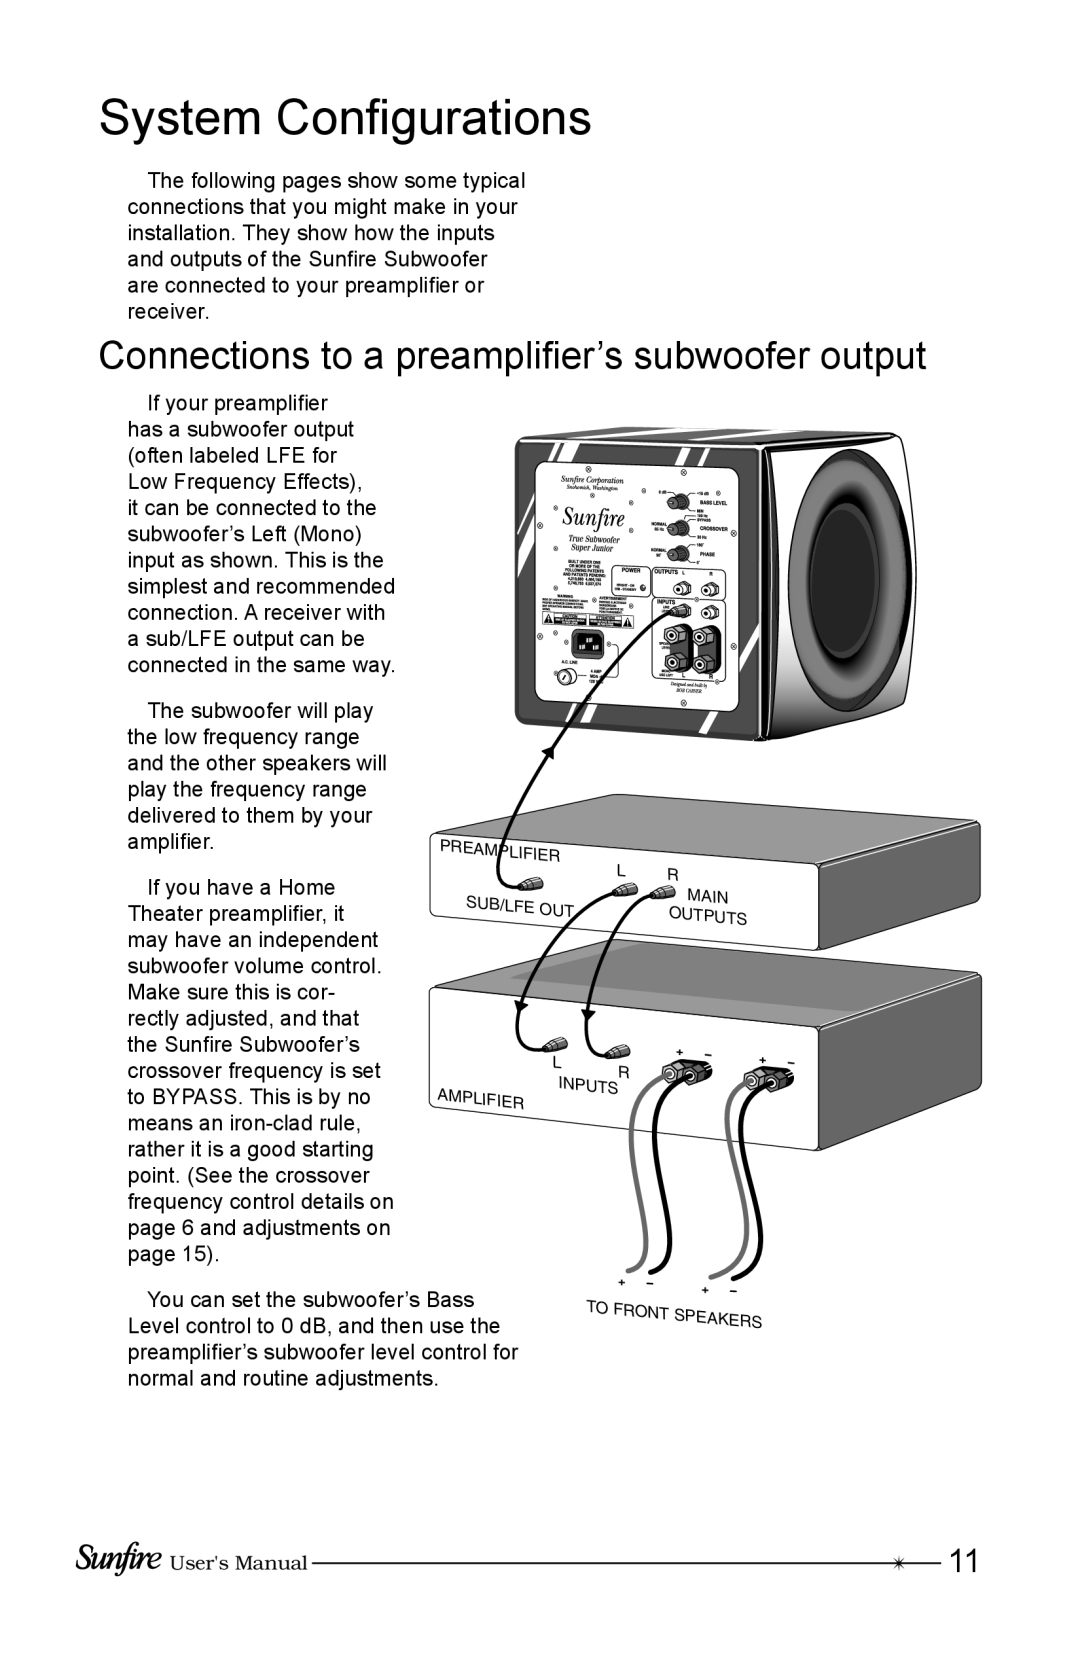 Sunfire Home Theater System manual System Conﬁgurations, Connections to a preampliﬁer’s subwoofer output 